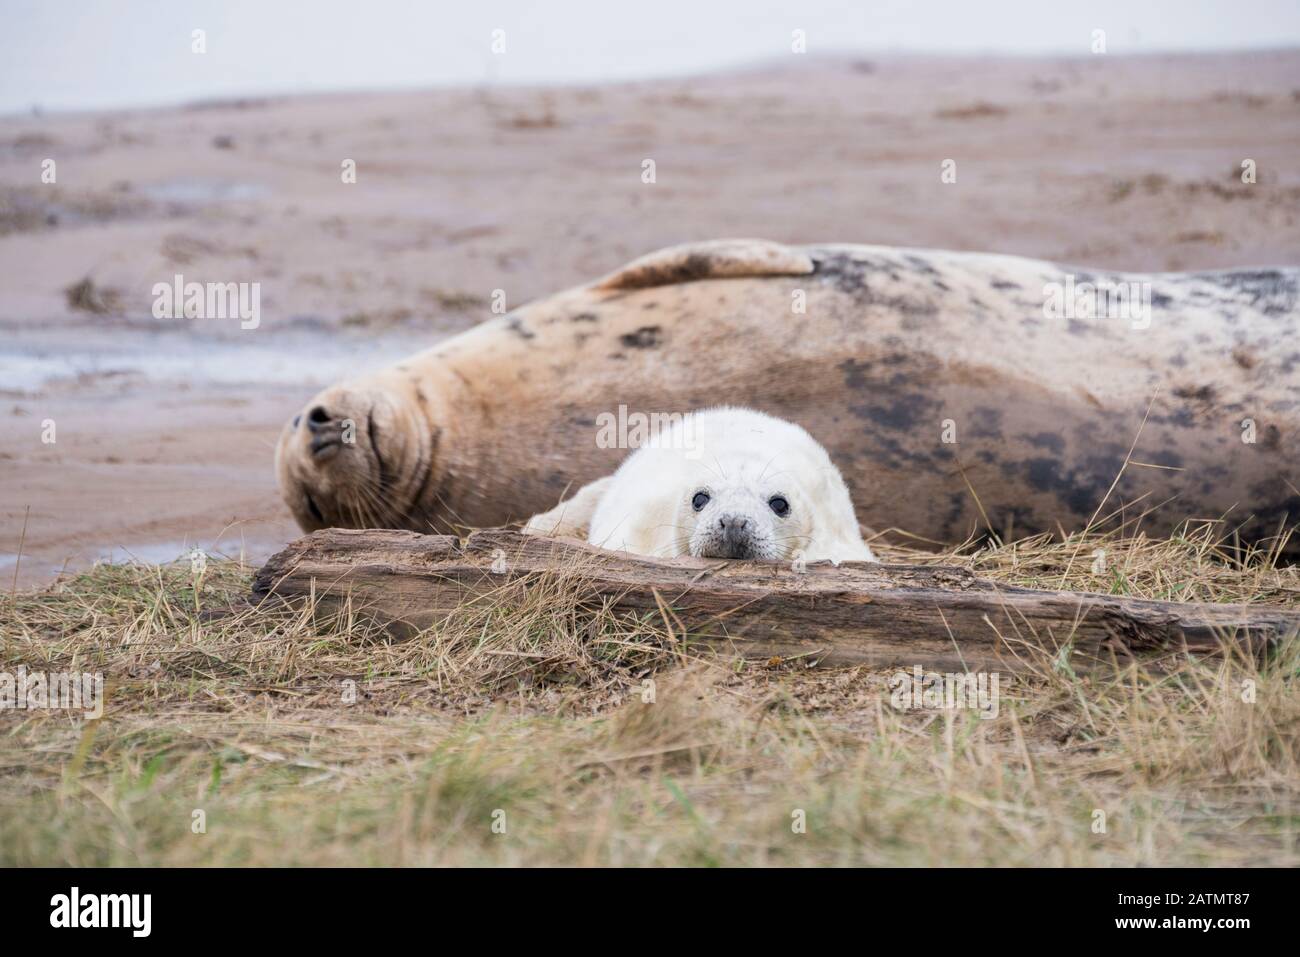 Donna Nook, Lincolnshire, UK – Nov 15: Cute fluffy newborn baby grey seal pup lies beside mother, resting on the mudflats on 15 Nov 2016 at Donna Nook Stock Photo